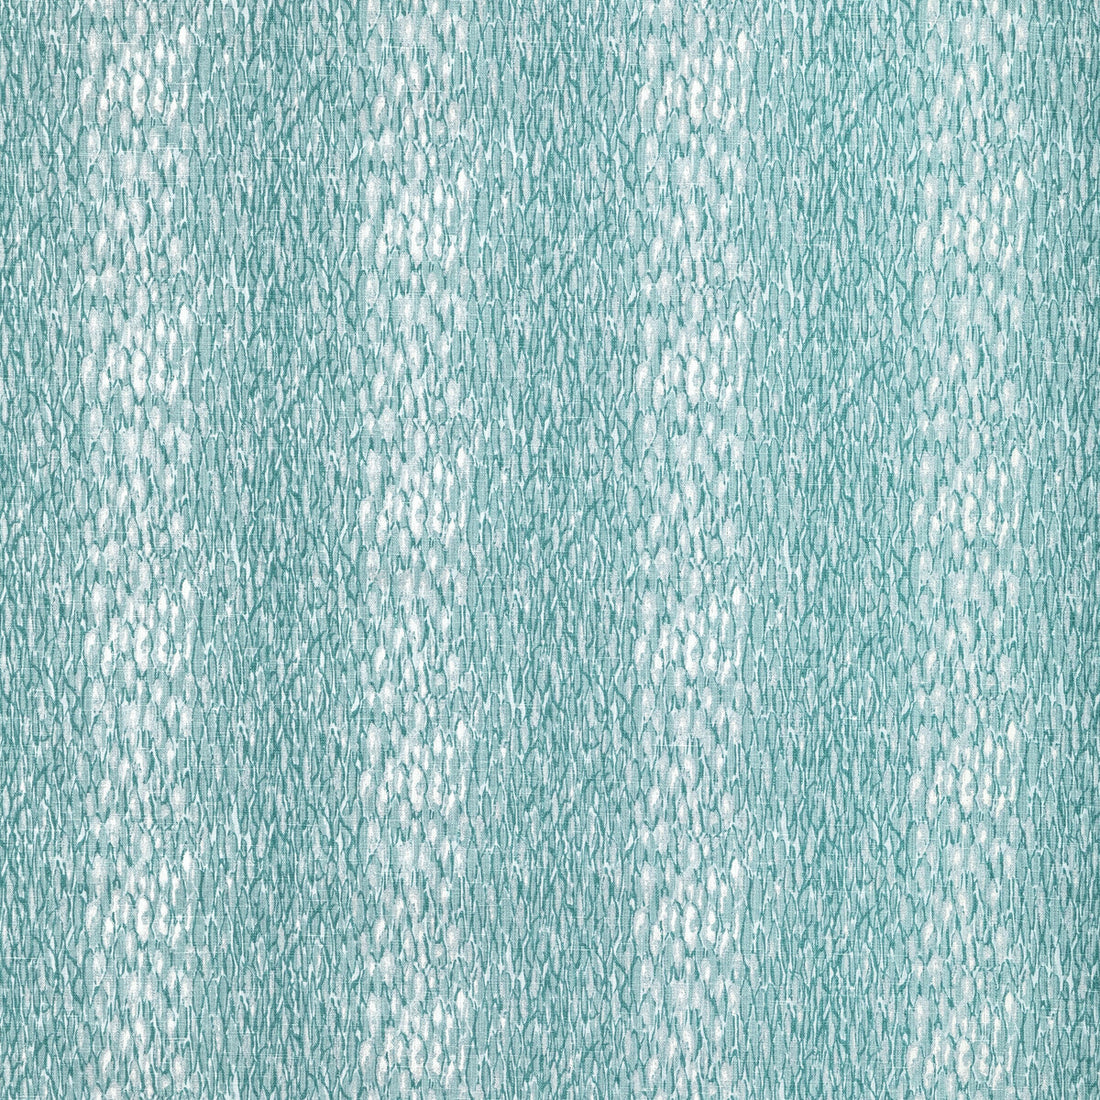 Chromis fabric in teal color - pattern CHROMIS.35.0 - by Kravet Basics in the Jeffrey Alan Marks Seascapes collection